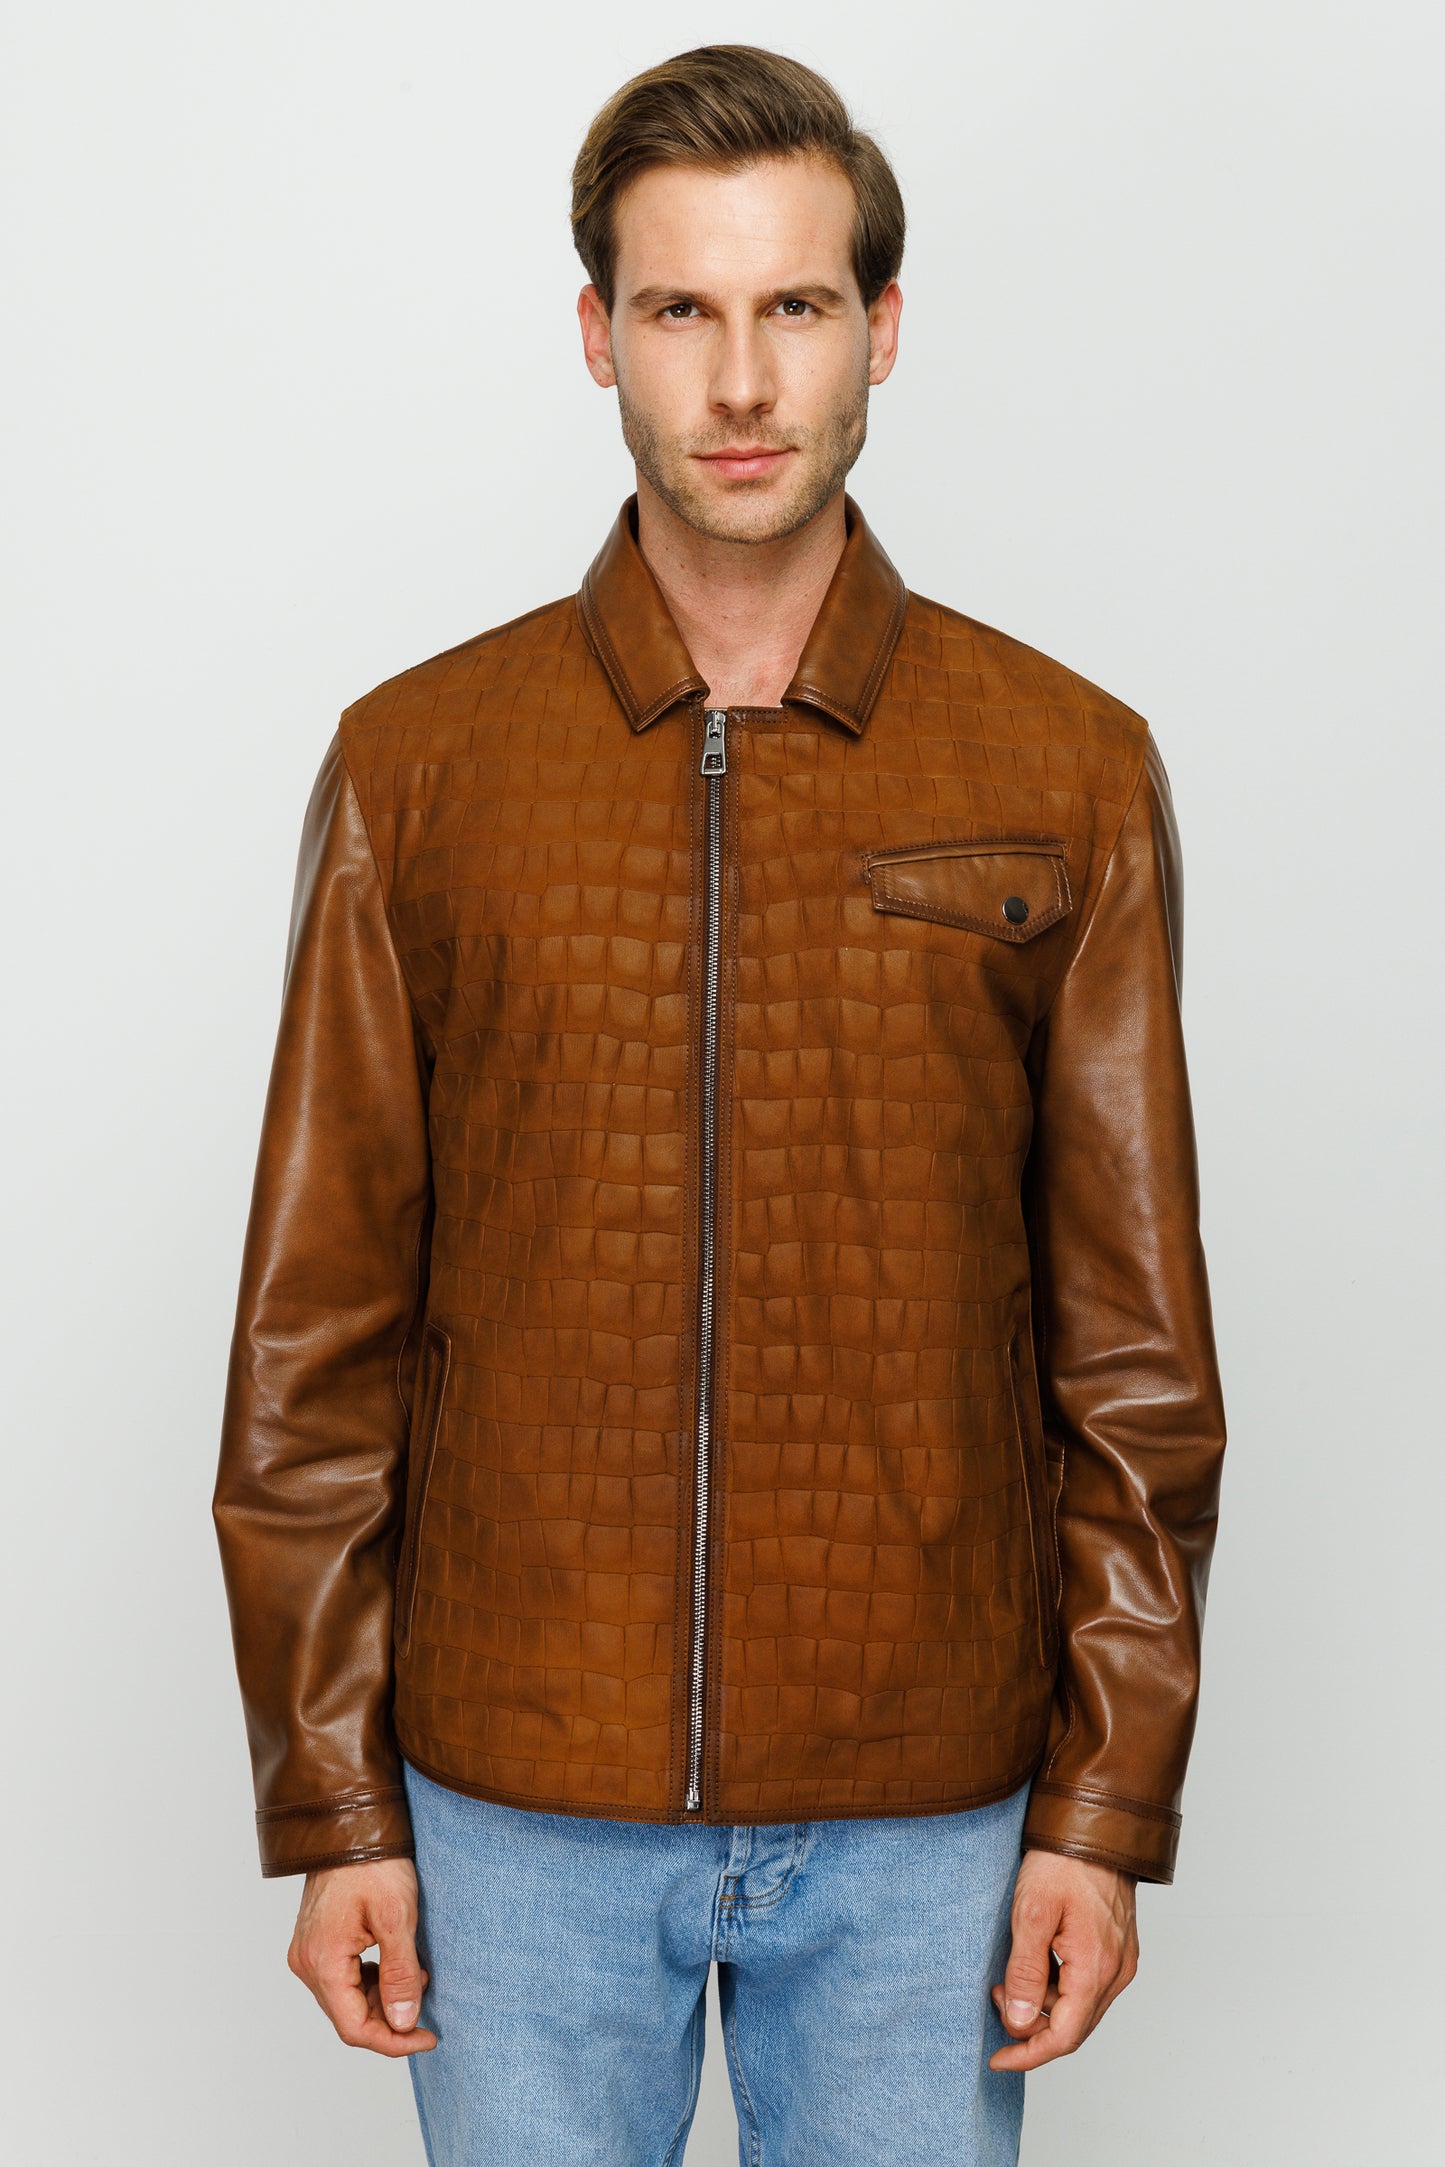 The Emerson Tan Leather Men Jacket